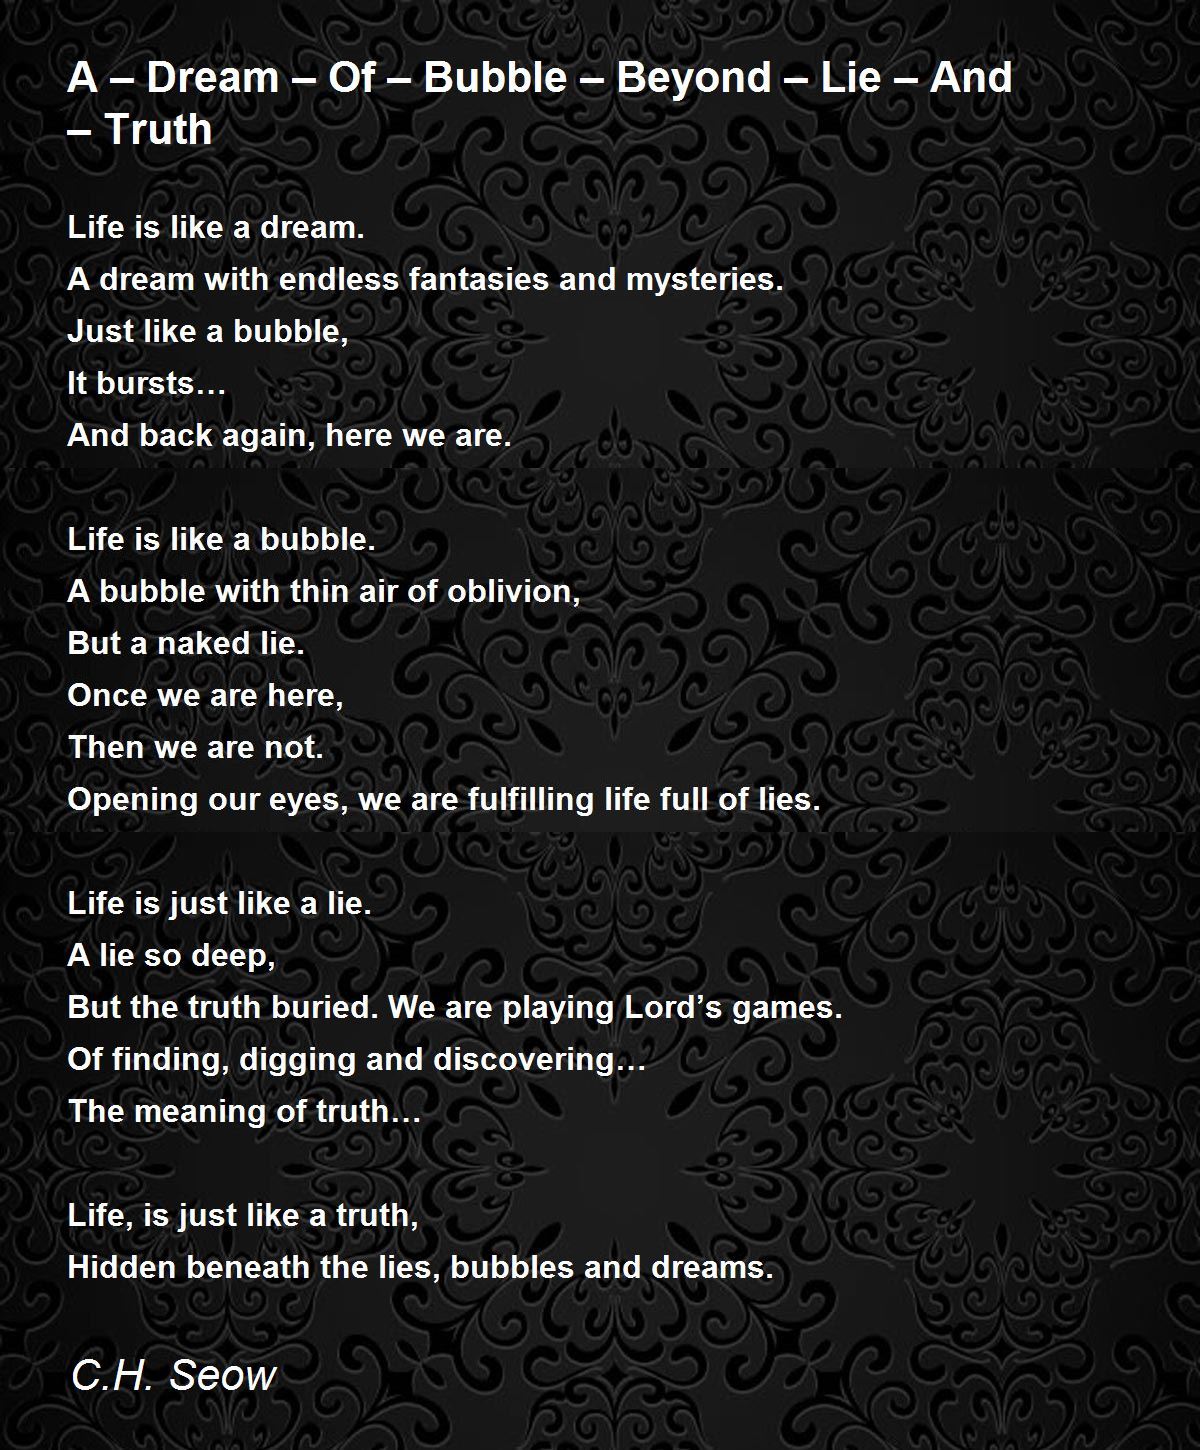 A Dream Of Bubble Beyond Lie And Truth A Dream Of Bubble Beyond Lie And Truth Poem By C H Seow